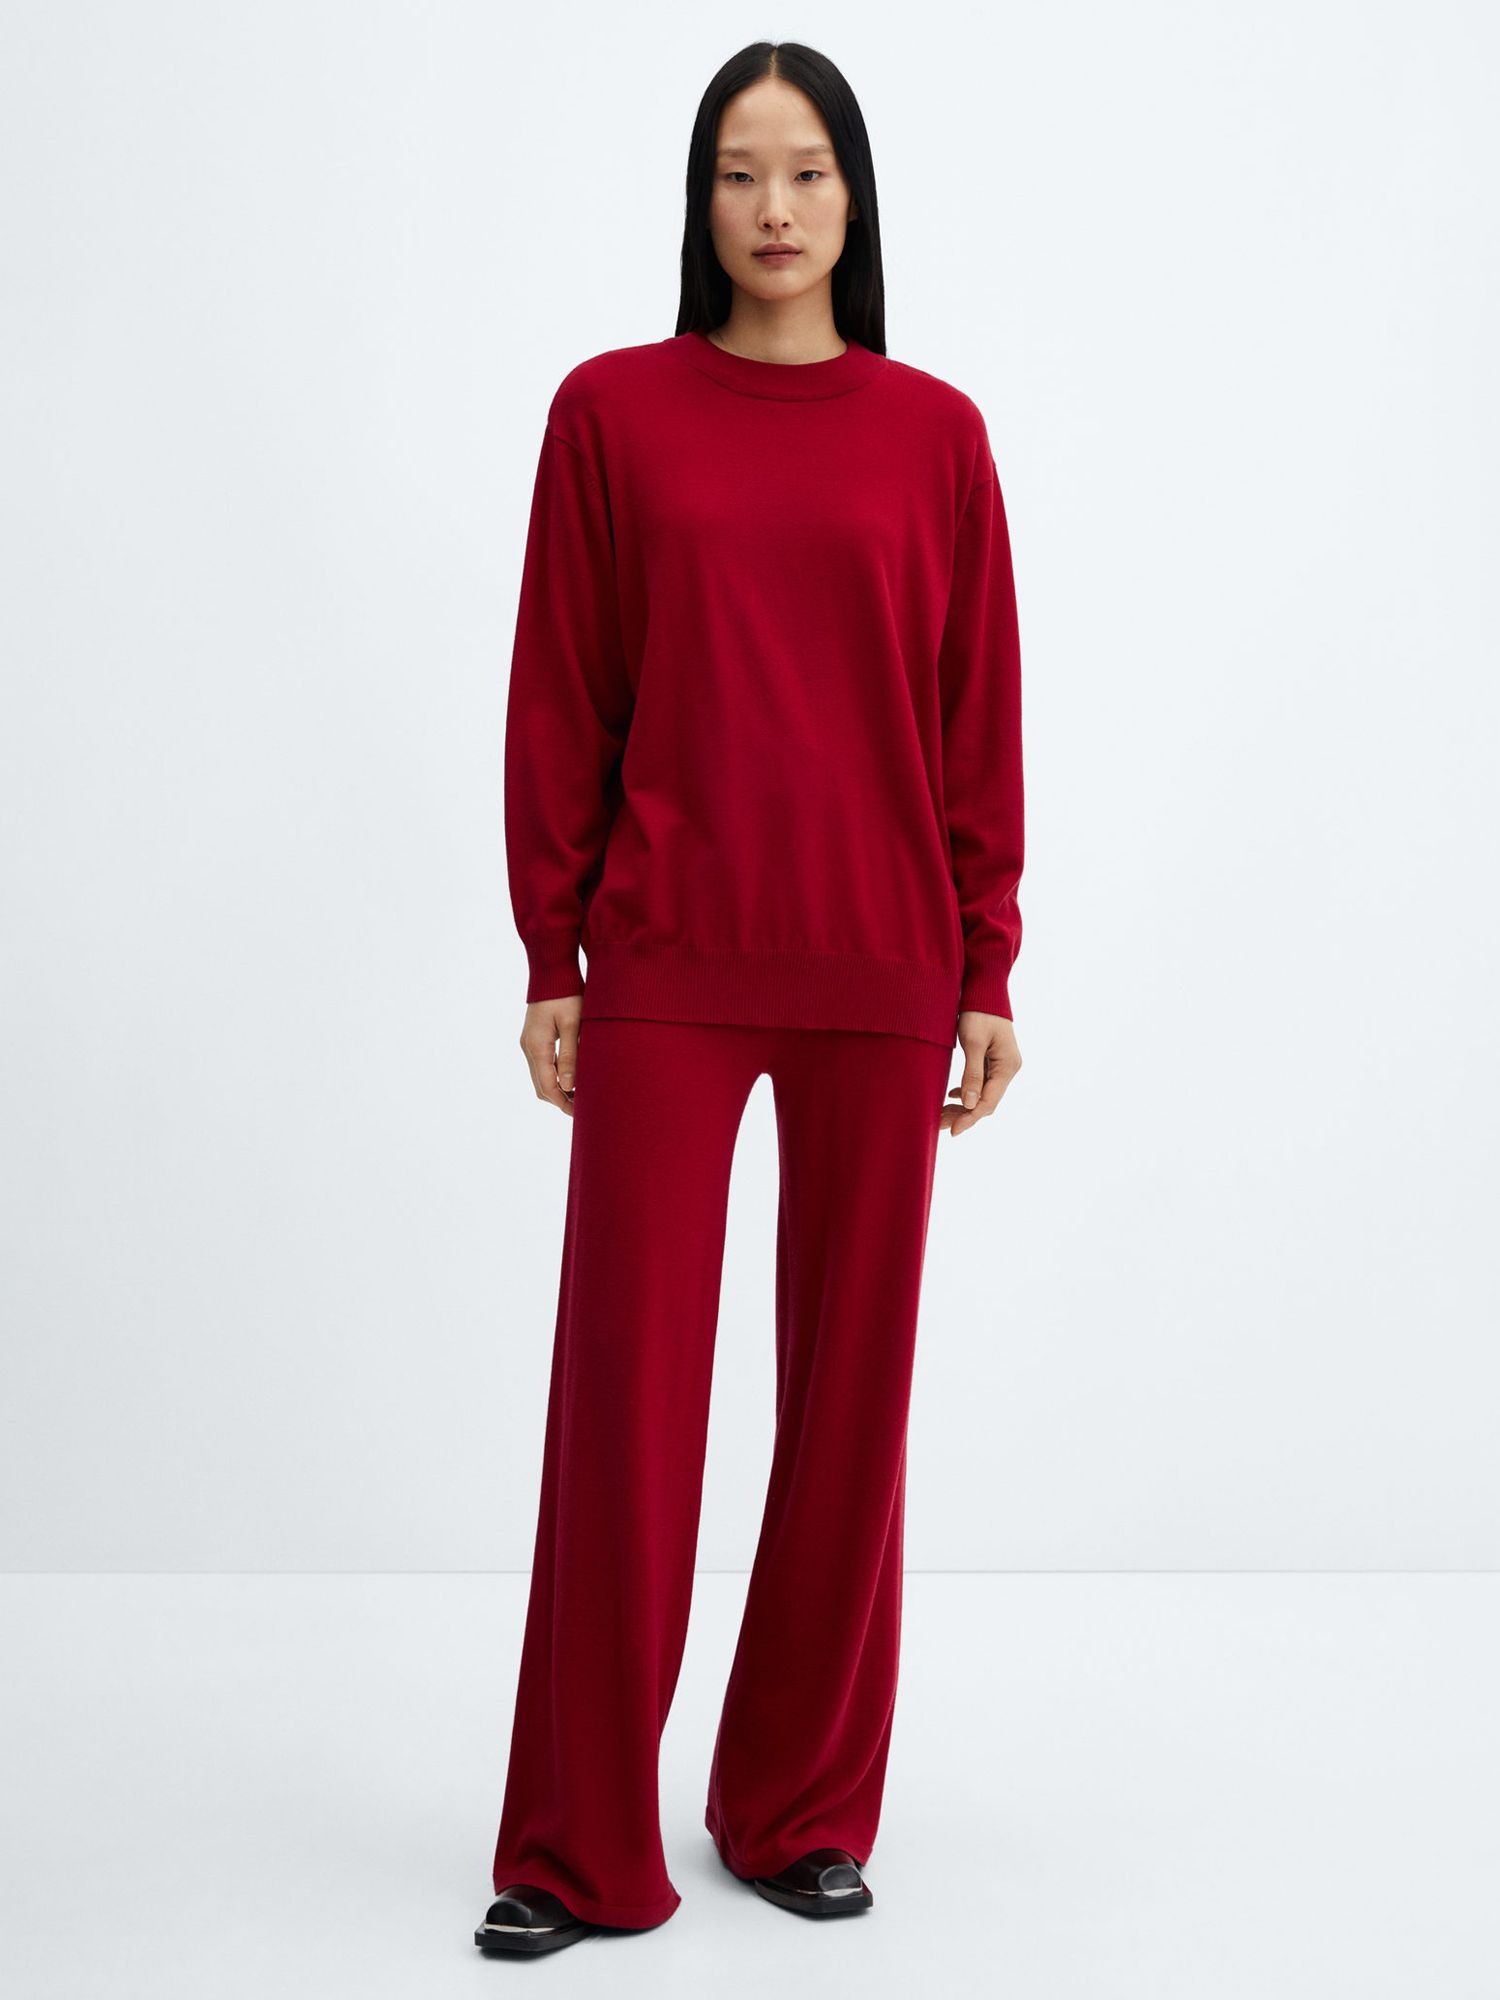 Buy Mango Vieira Knitted Wide Leg Trousers Online at johnlewis.com